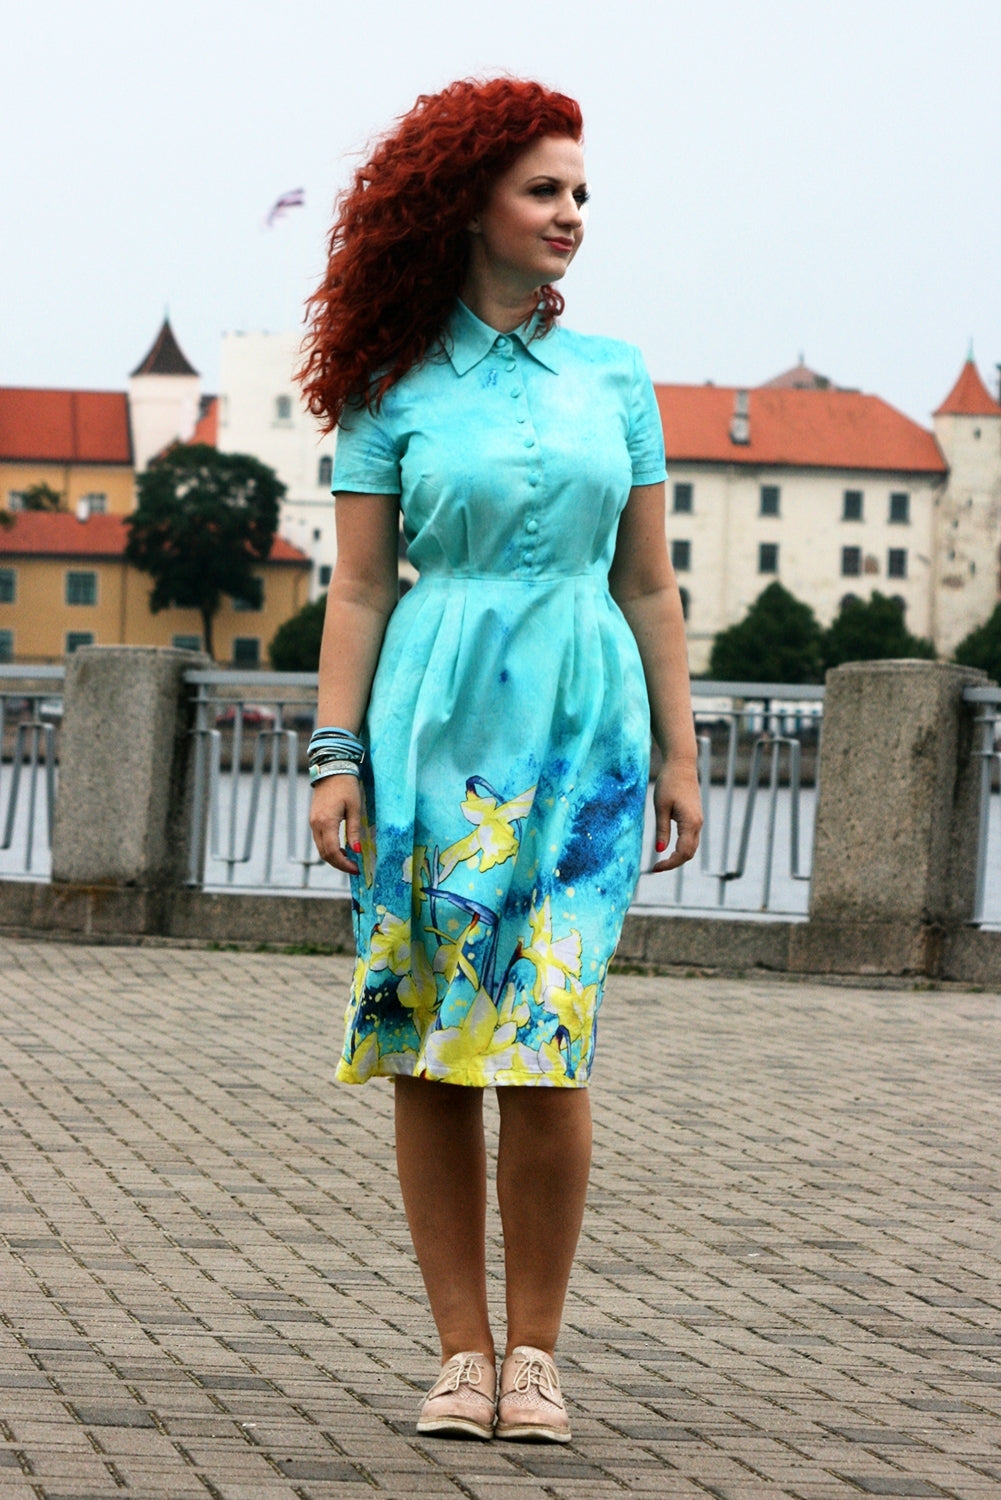 Turquoise collar dress with painted daffodil